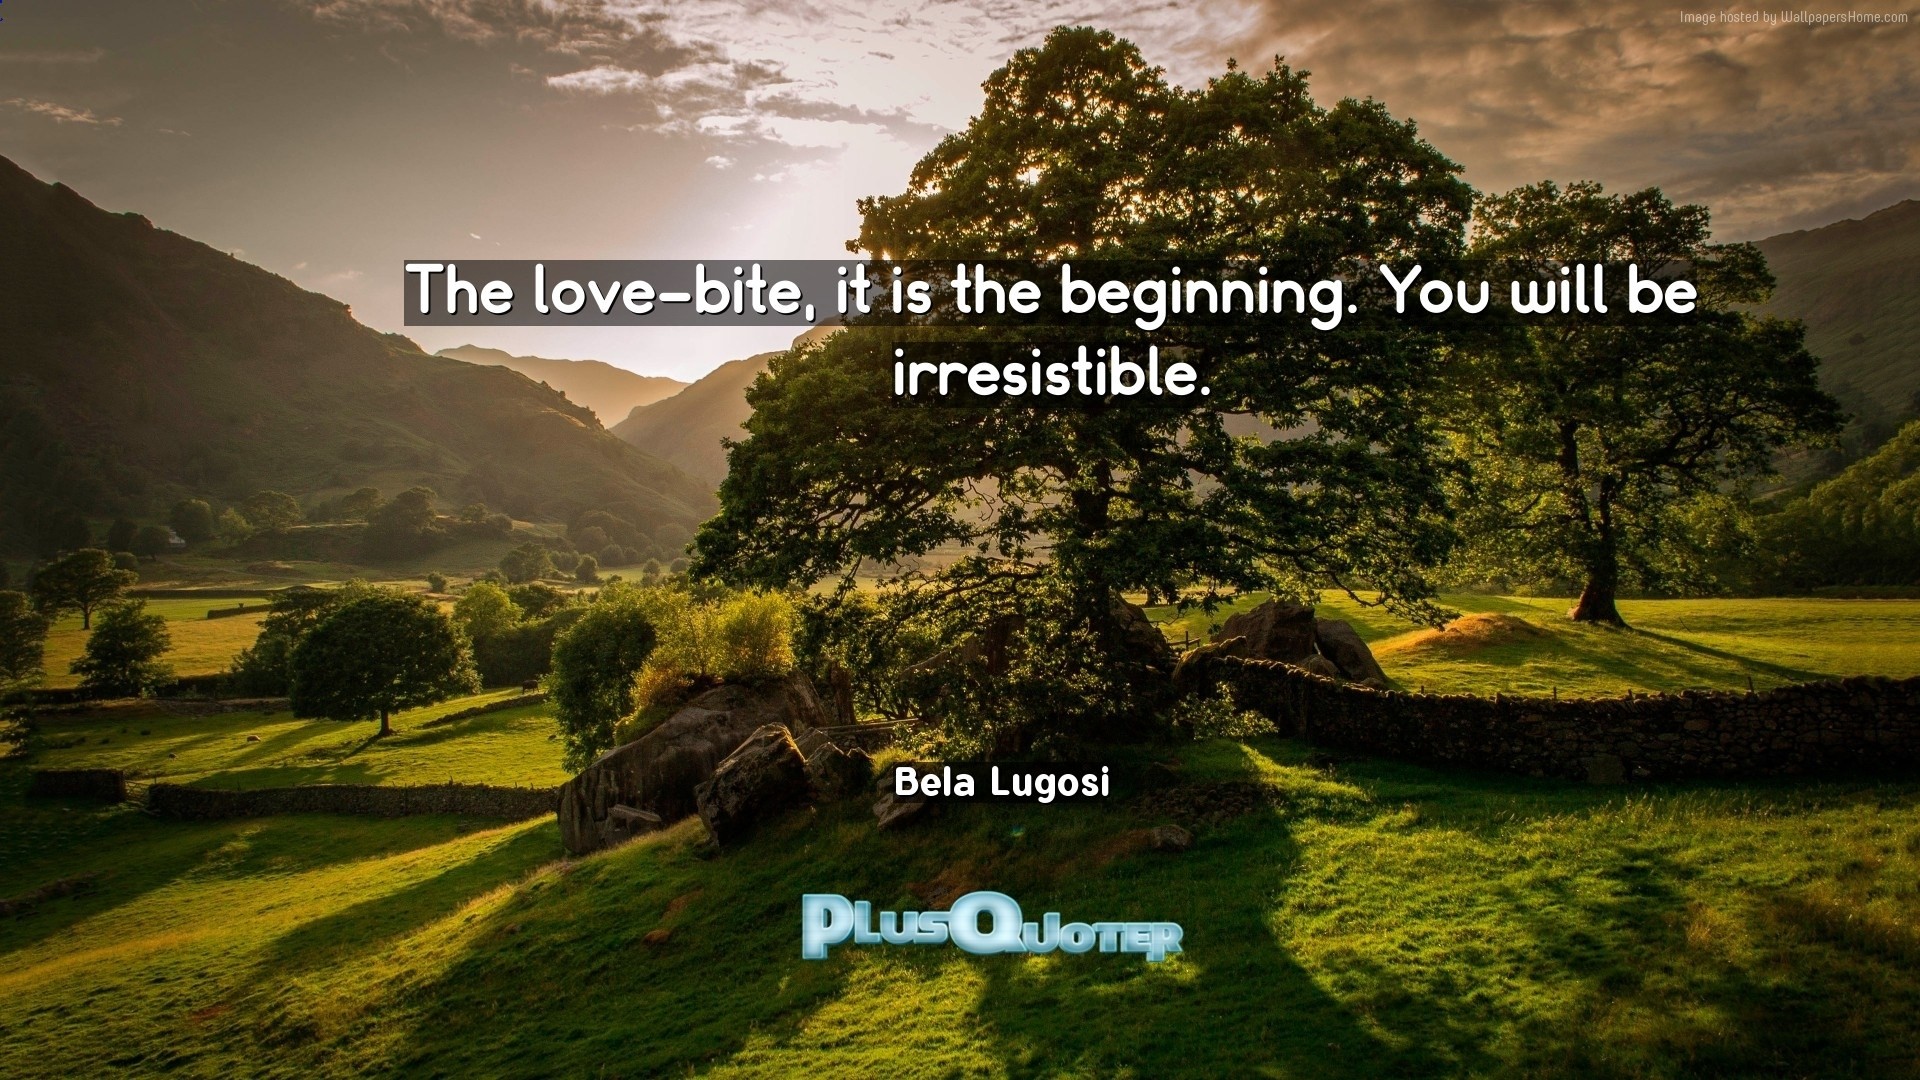 1920x1080 Download Wallpaper with inspirational Quotes- "The love-bite, it is the  beginning